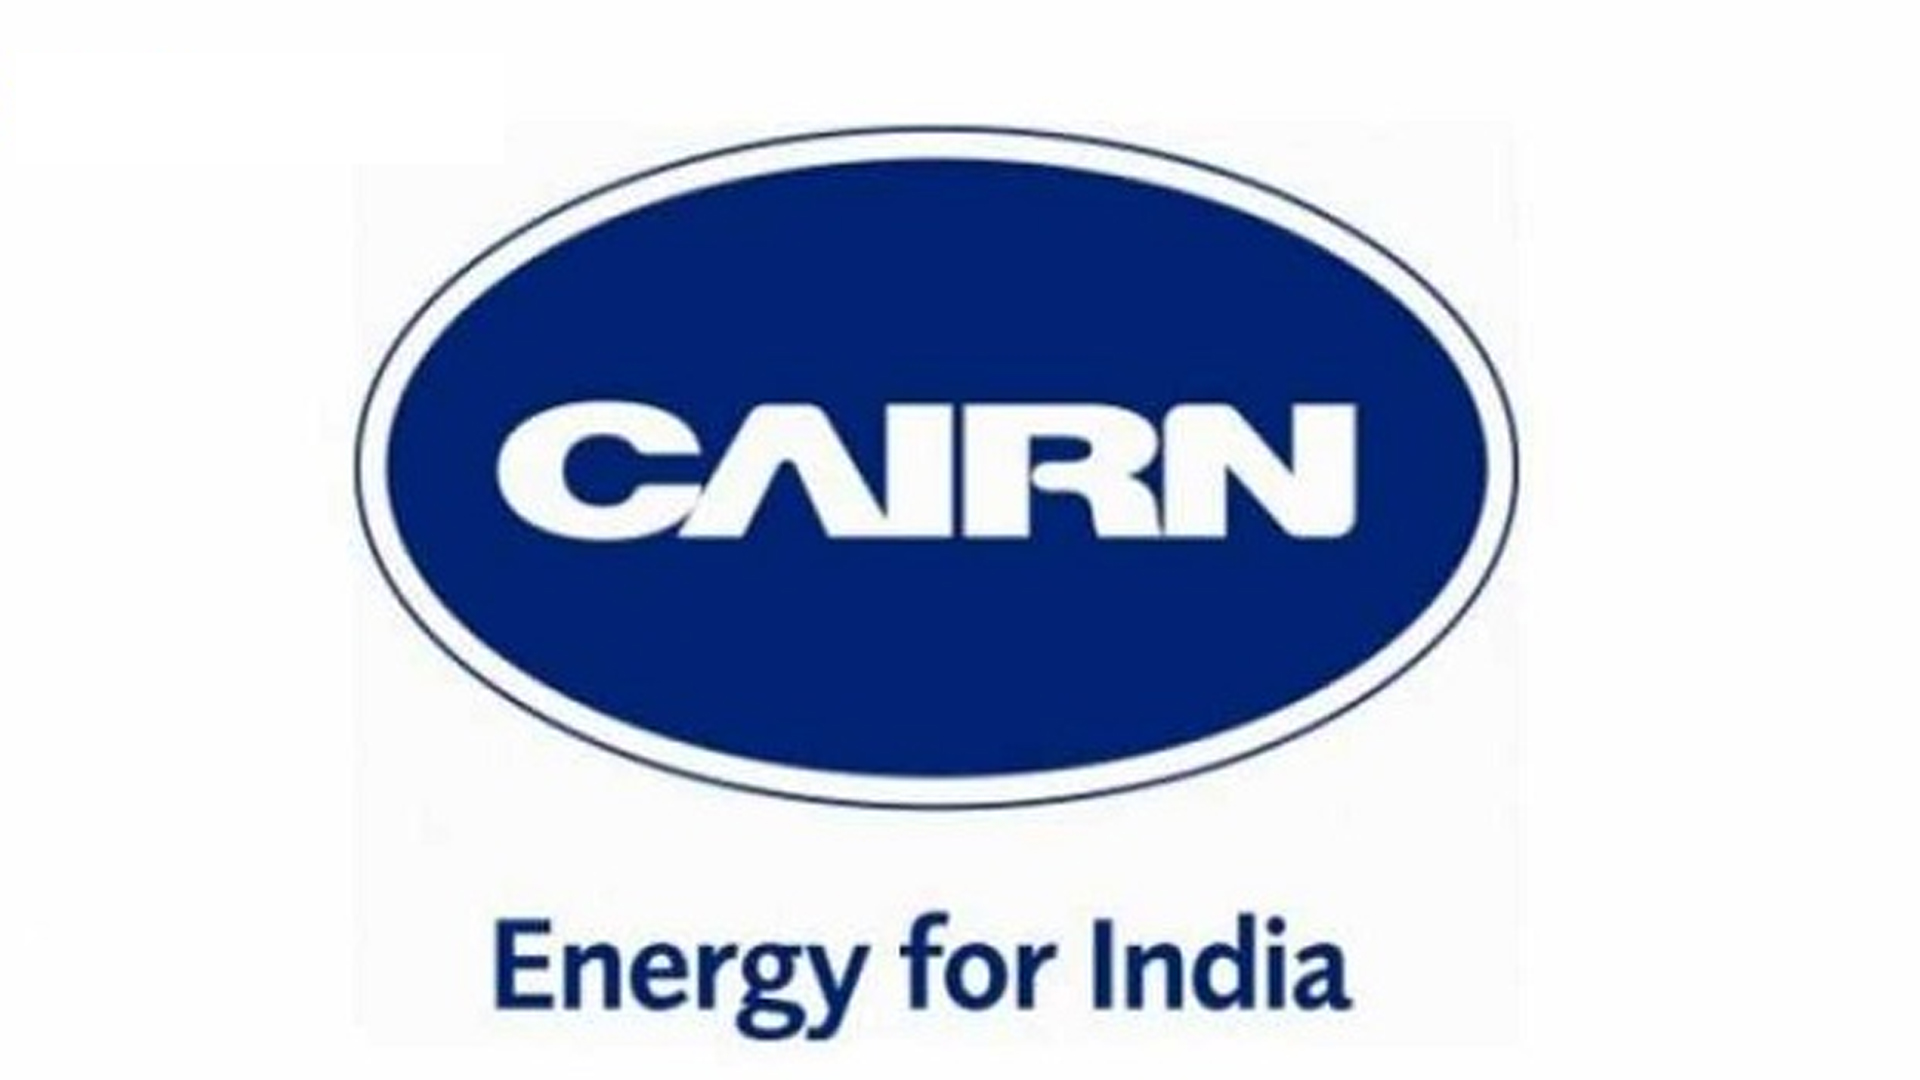 Cairn’s Ravva oil field enters 28th year of production